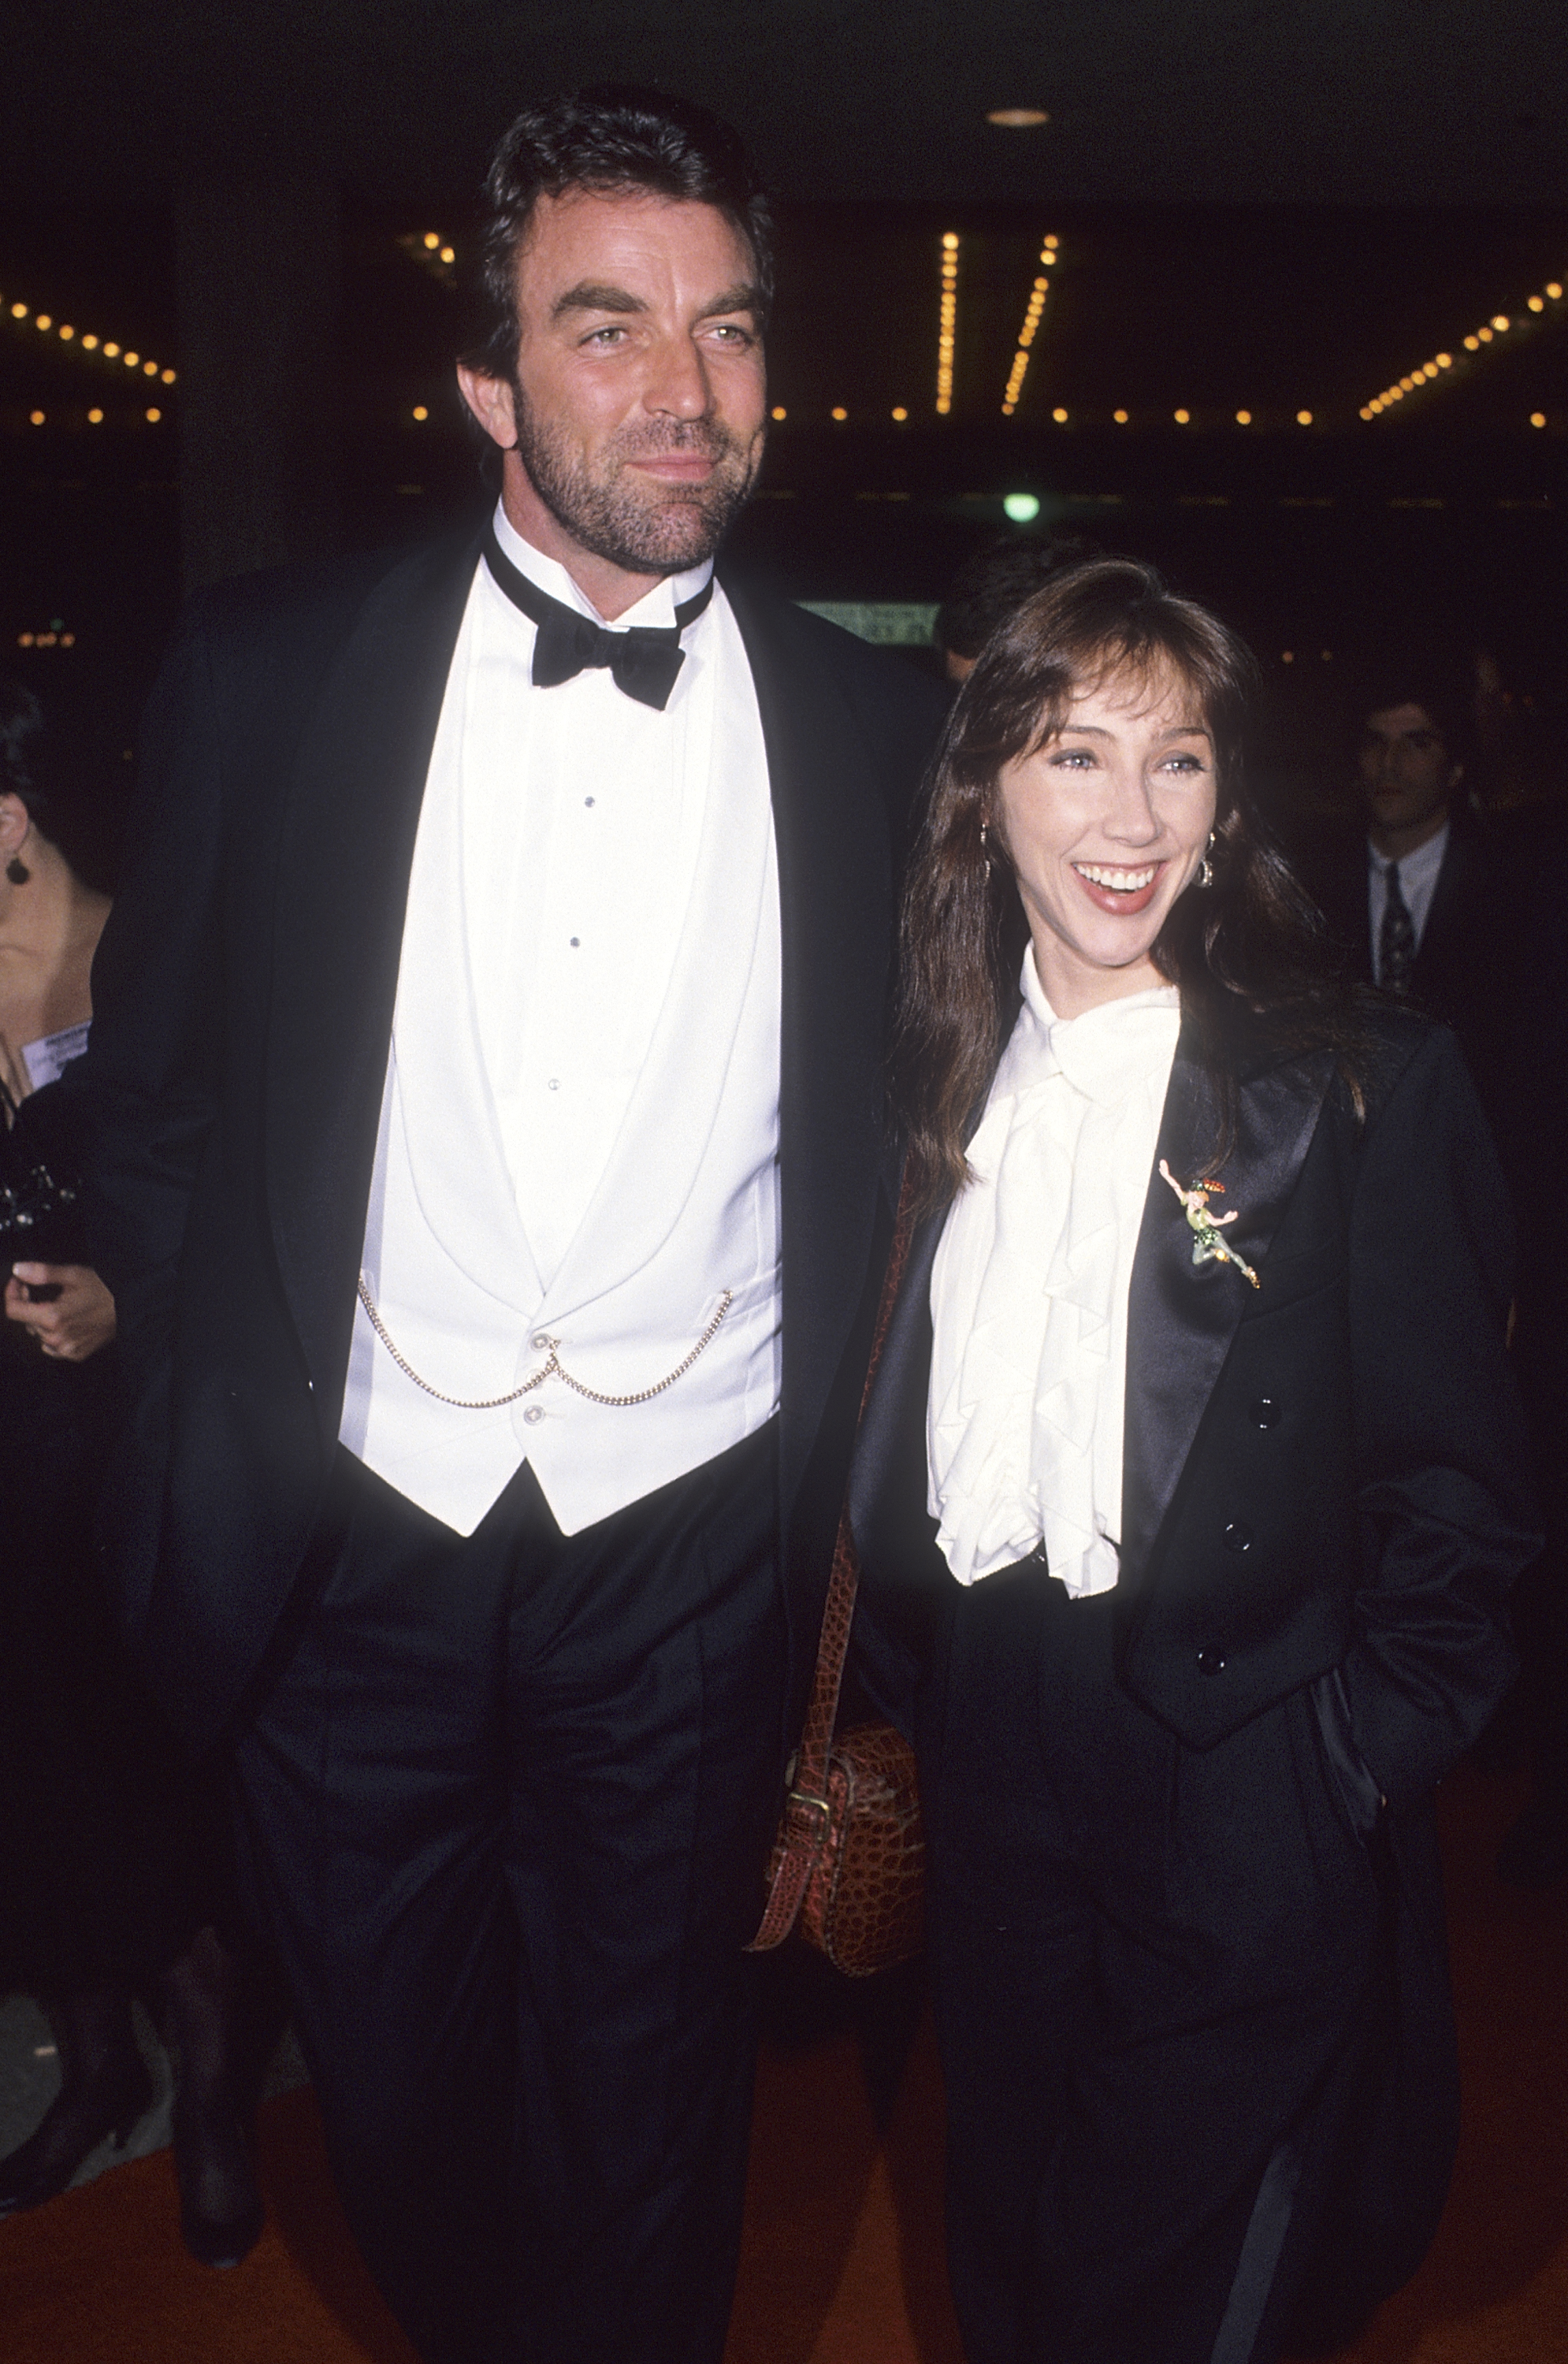 Tom Selleck and Jillie Mack attend Warner Bros. Host a "Celebration of Tradition" Gala at Warner Bros. Studios in Burbank, California on June 2, 1990. | Source: Getty Images